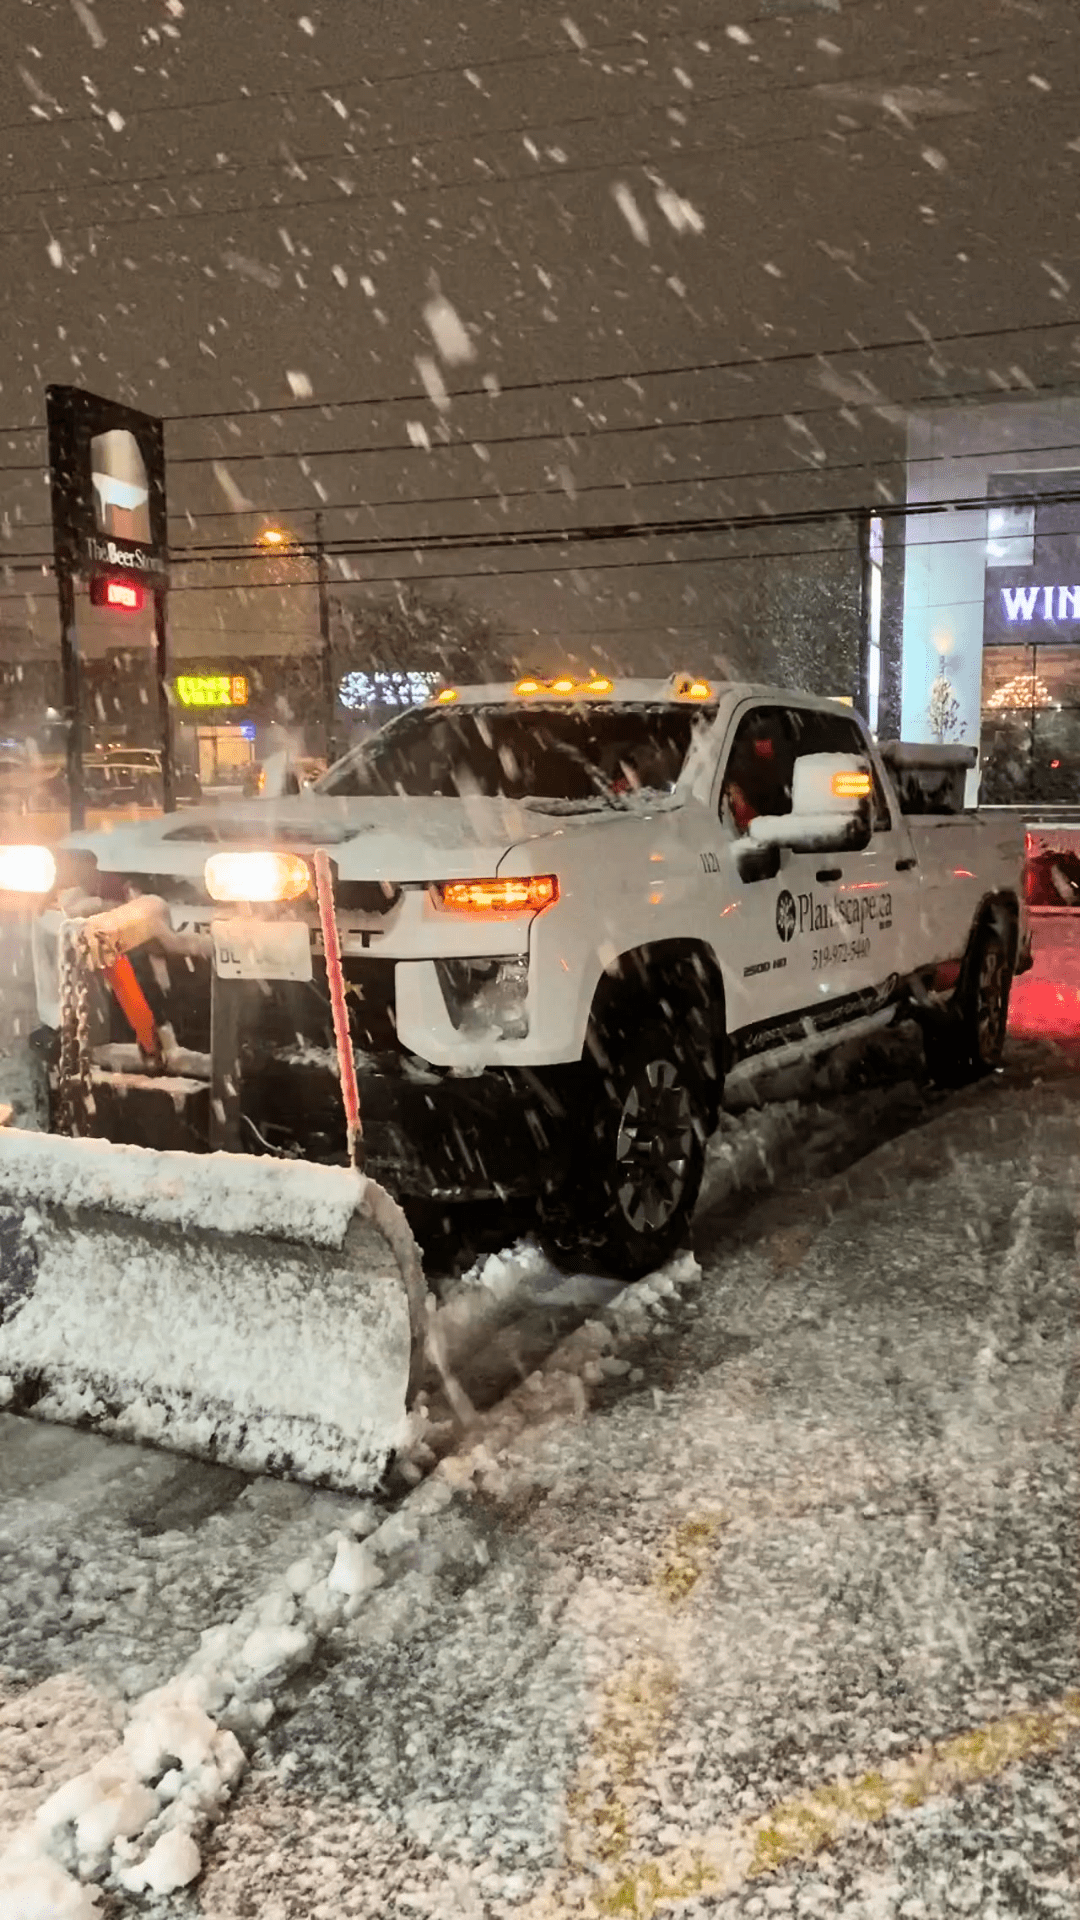 A white pickup truck with visible branding plows snow at night under heavy snowfall, with illuminated signs and street lights in the background.